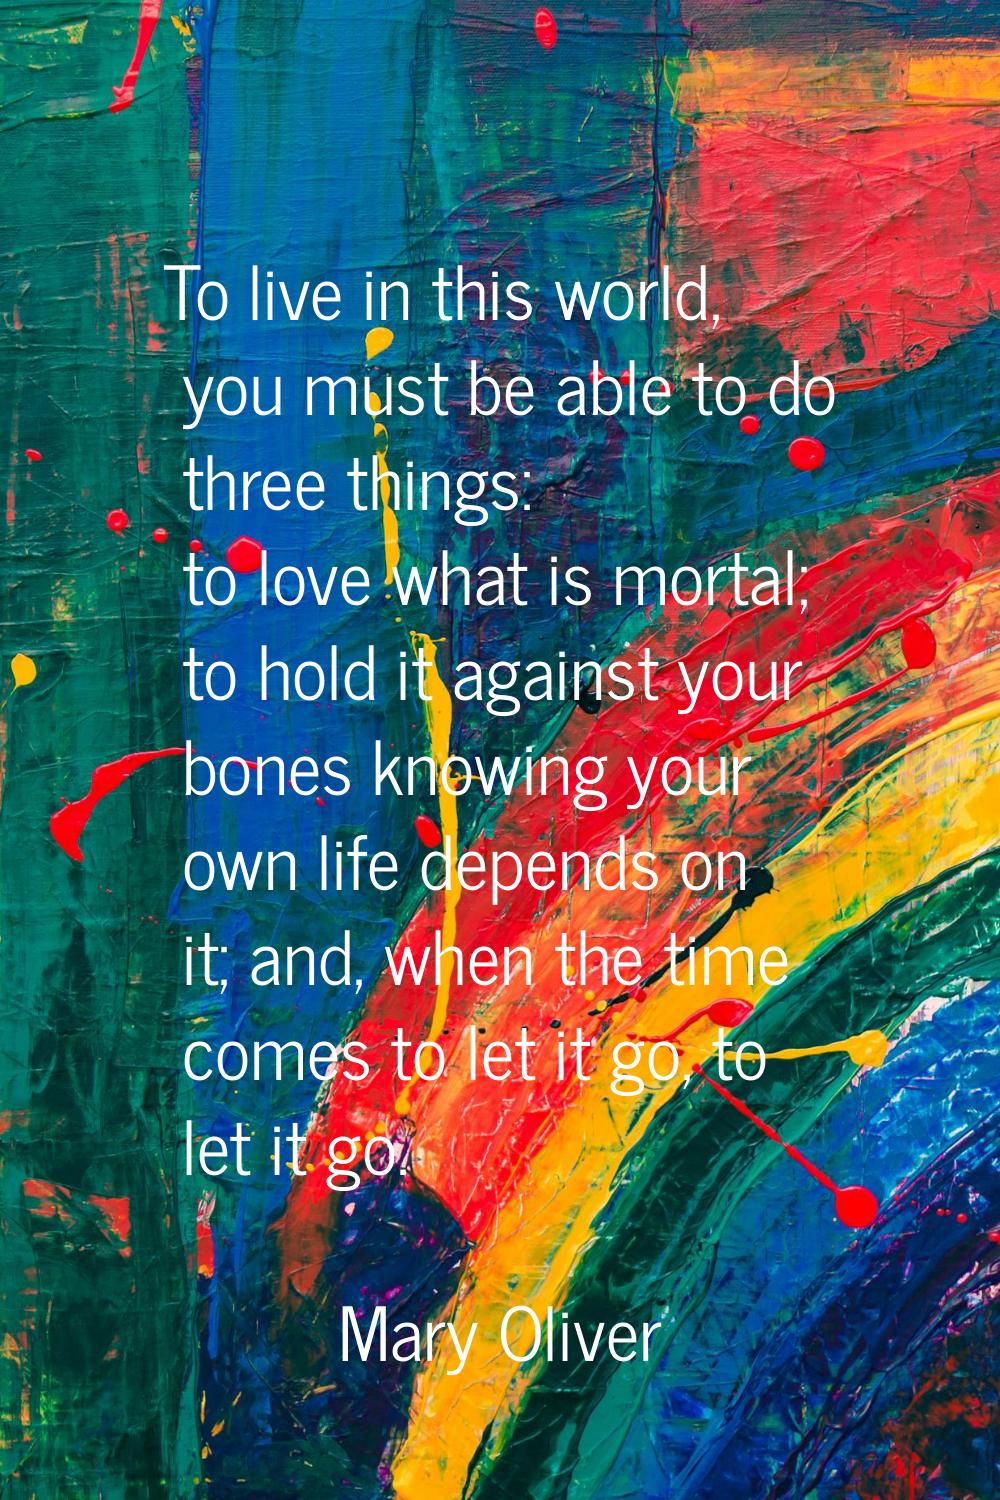 To live in this world, you must be able to do three things: to love what is mortal; to hold it agai